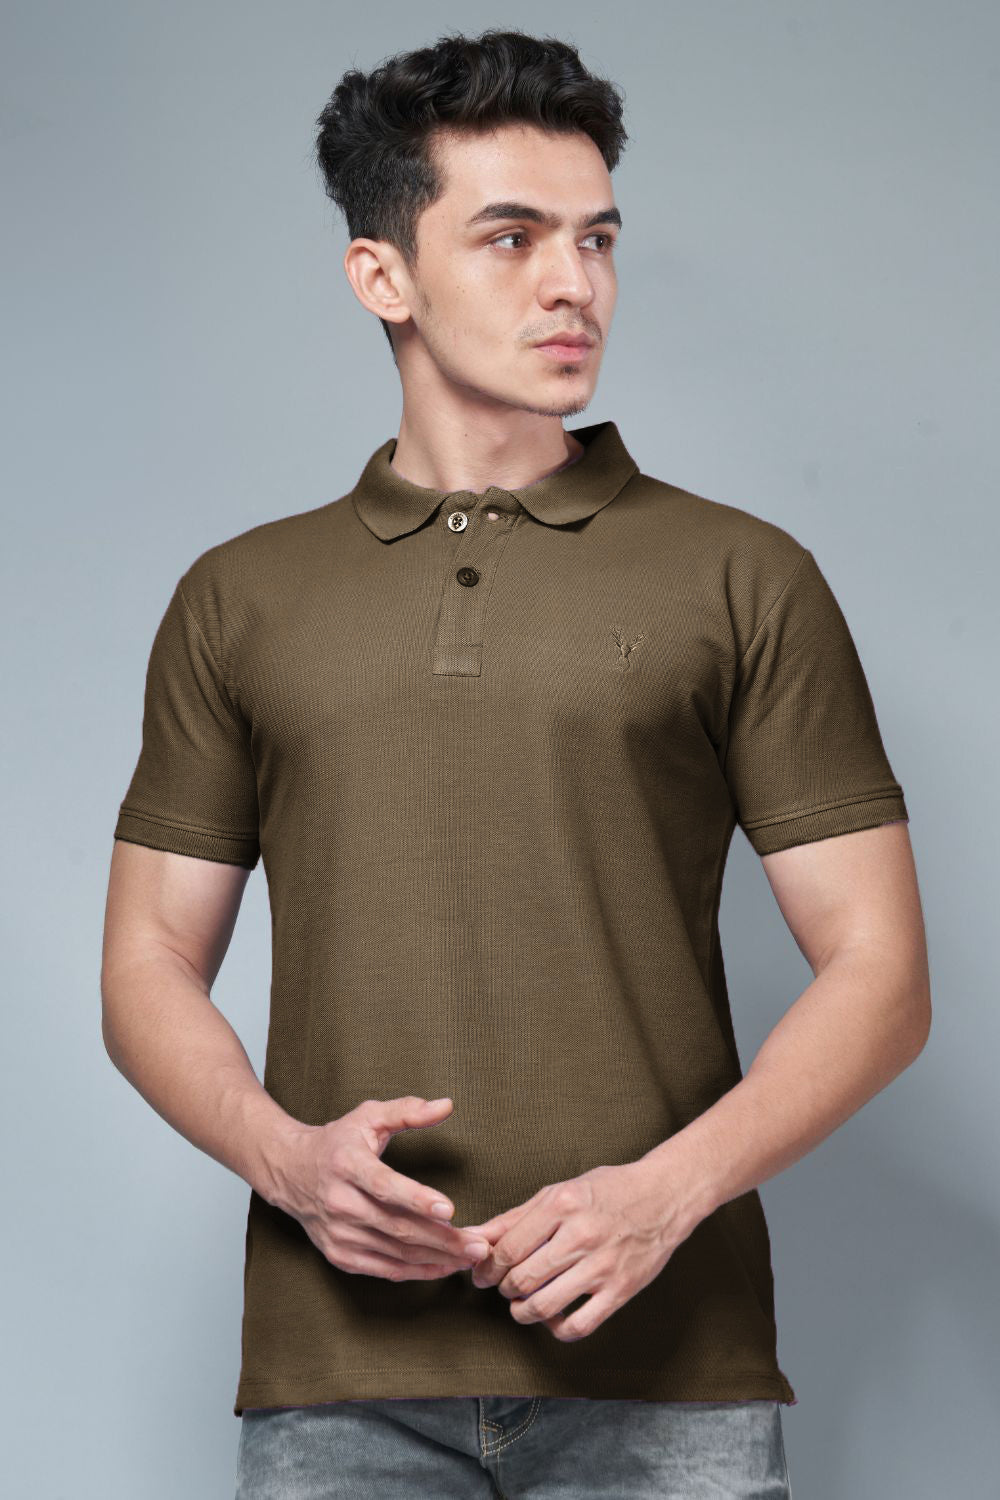 Olive colored, identity Polo T-shirts for men with collar and half sleeves.